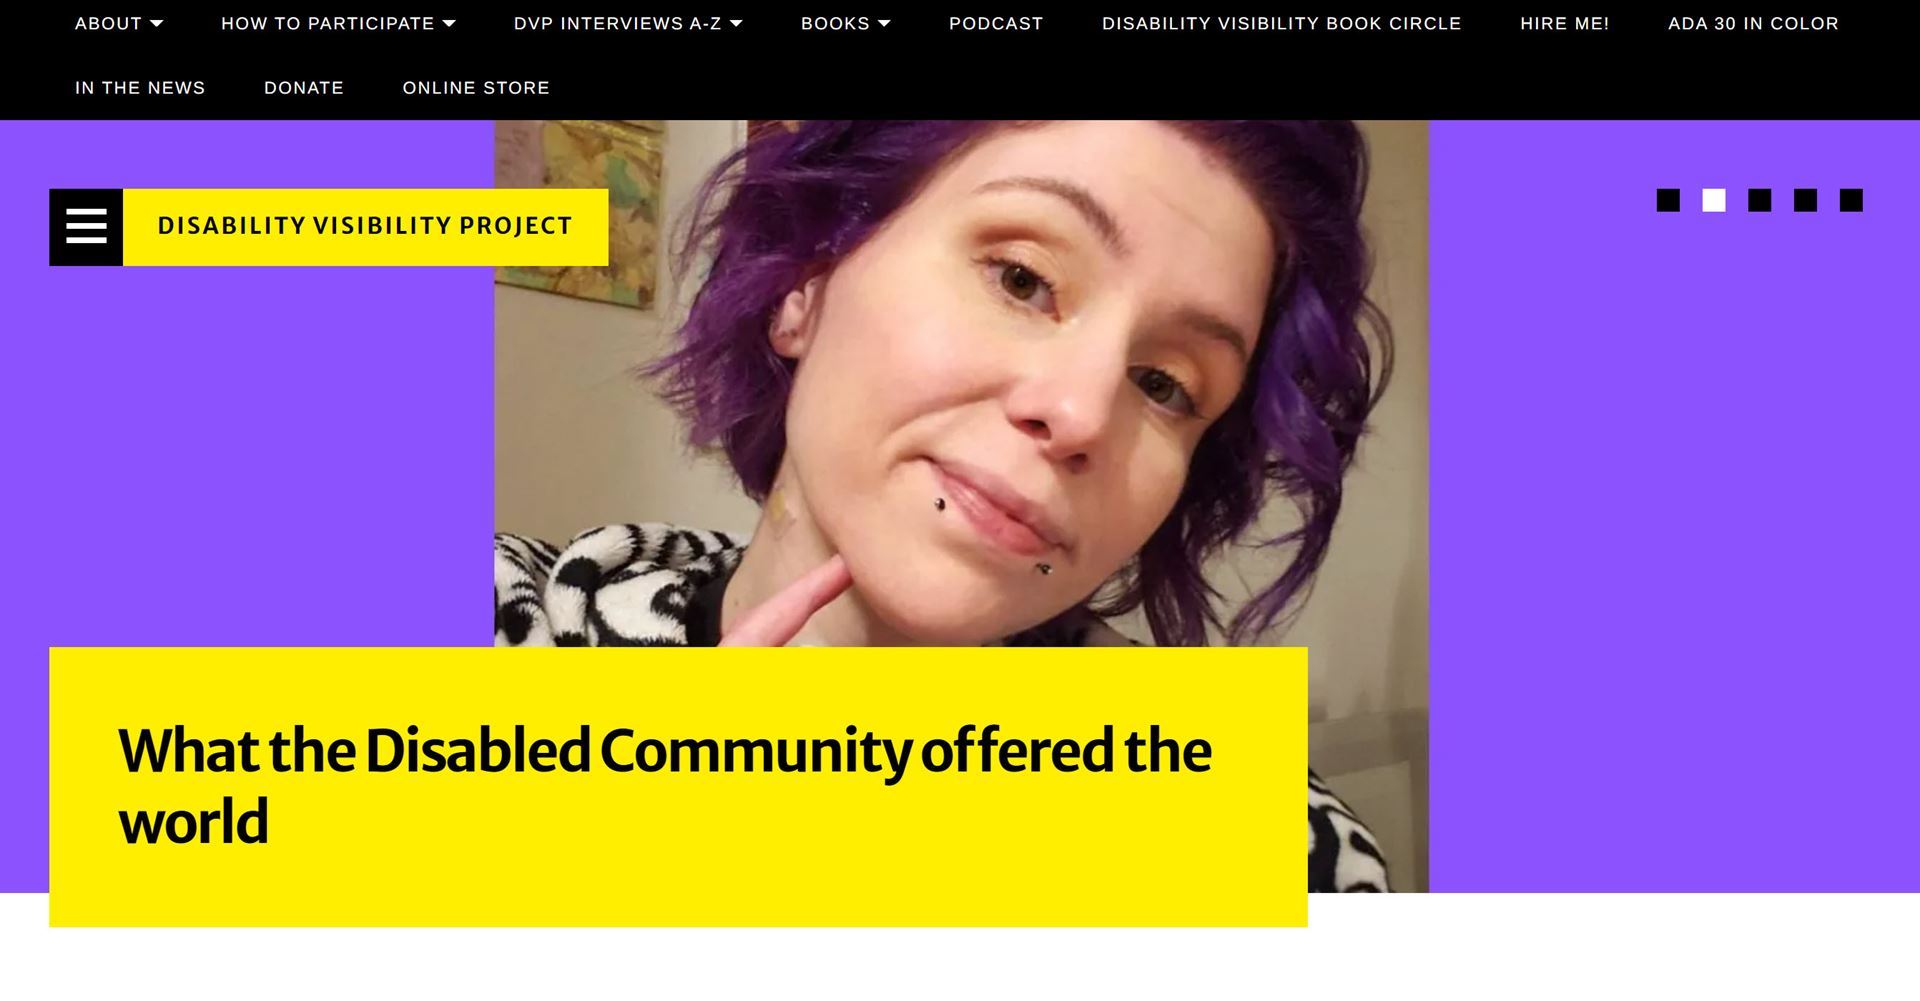 Screen capture of the Disabiltiy Visibility Project home page.